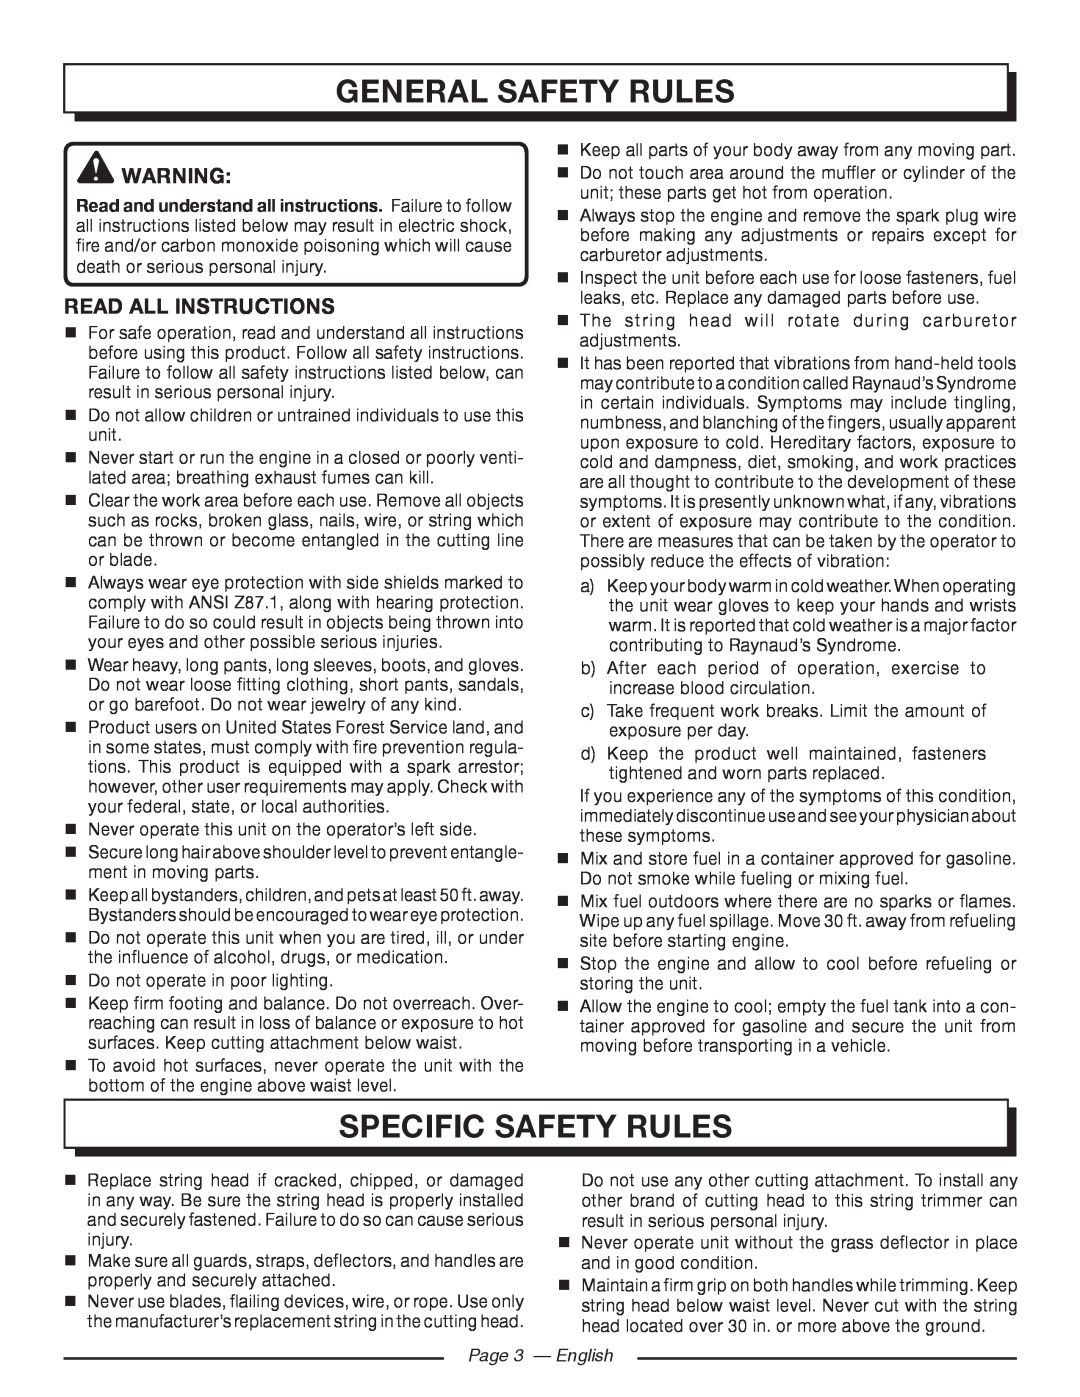 Homelite UT32600, UT32650 General Safety Rules, Specific Safety Rules, read all instructions, Page 3 - English 